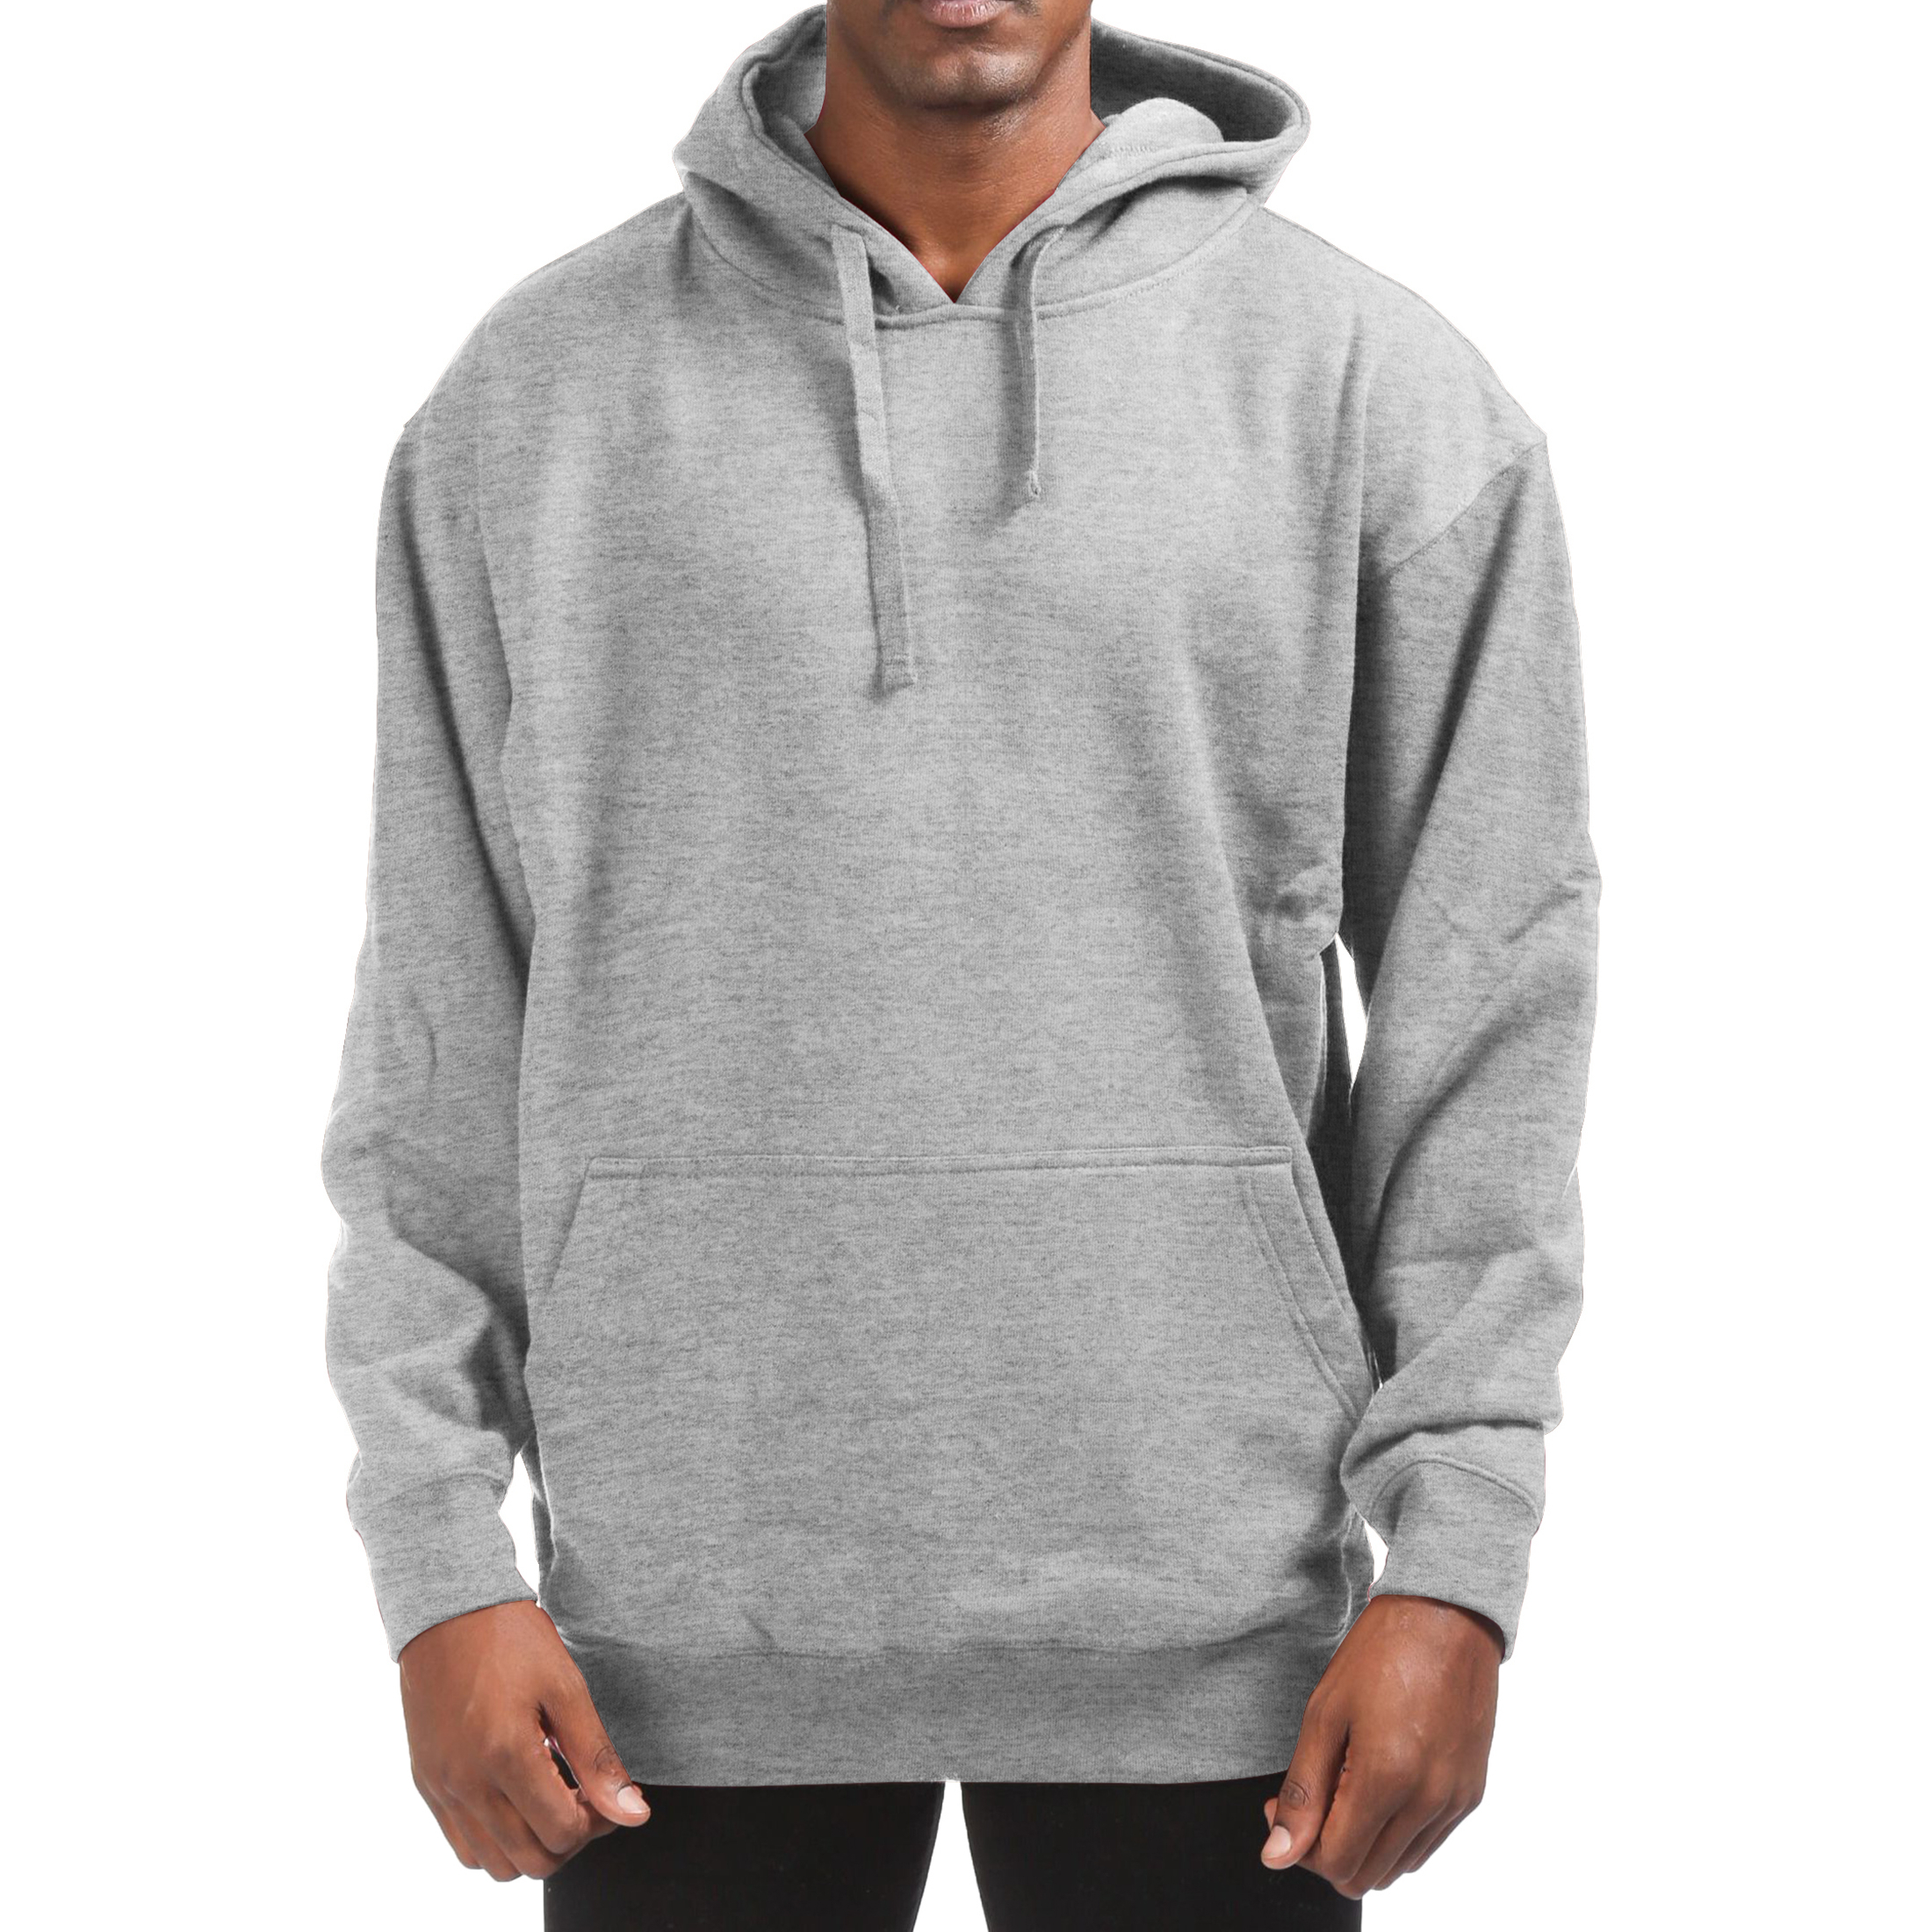 Men's Cotton-Blend Fleece Pullover Hoodie With Pocket (Big & Tall Sizes Available) - Gray, Medium